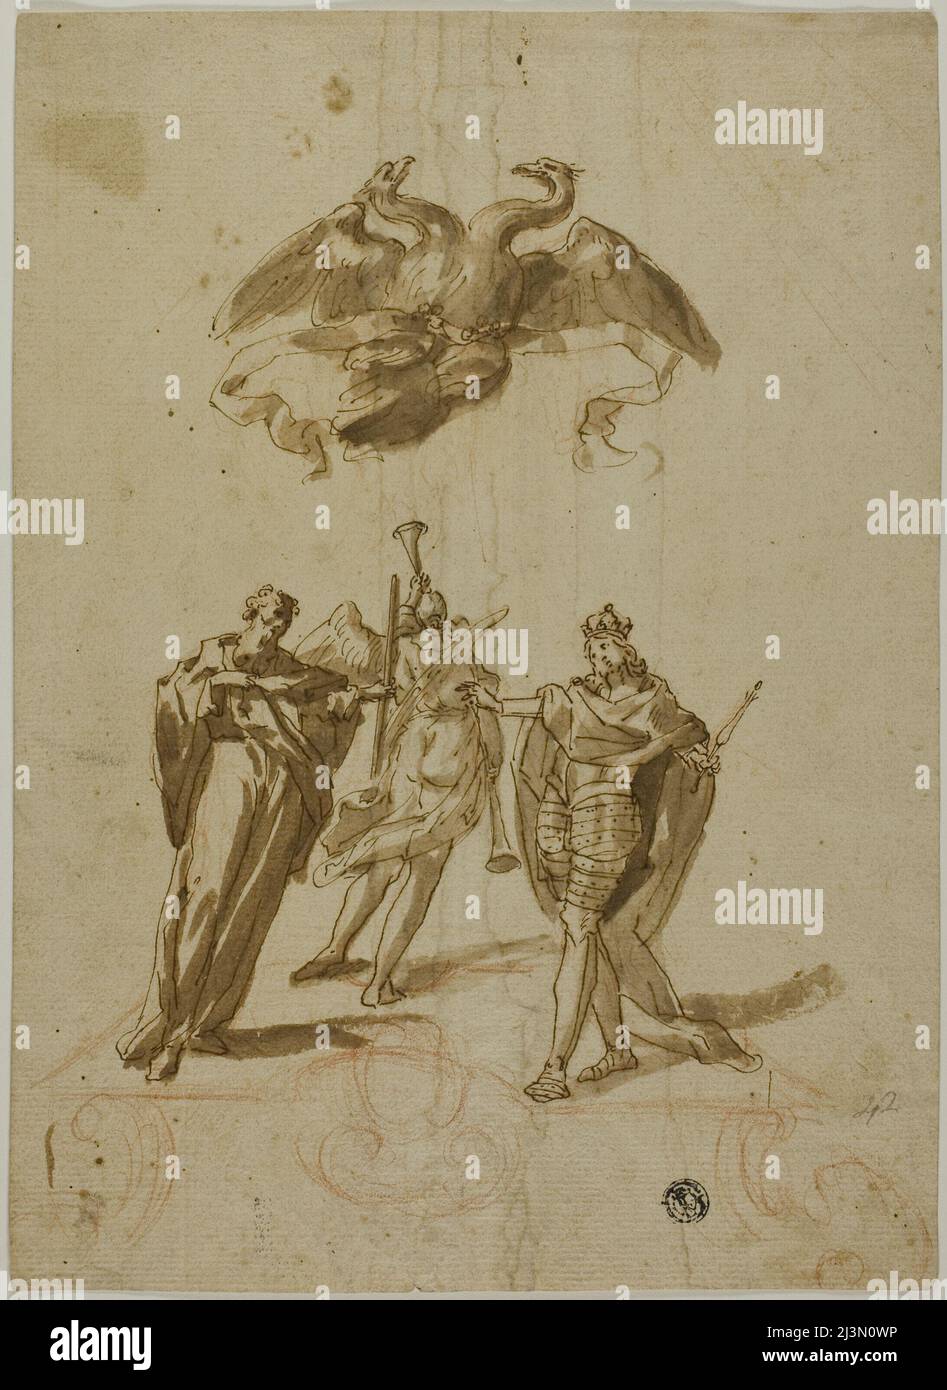 Allegorical Subject: Two-headed Imperial Eagle on Clouds; On Ground, a Draped Figure, a King and a Figure of Fame, 16th century. Stock Photo